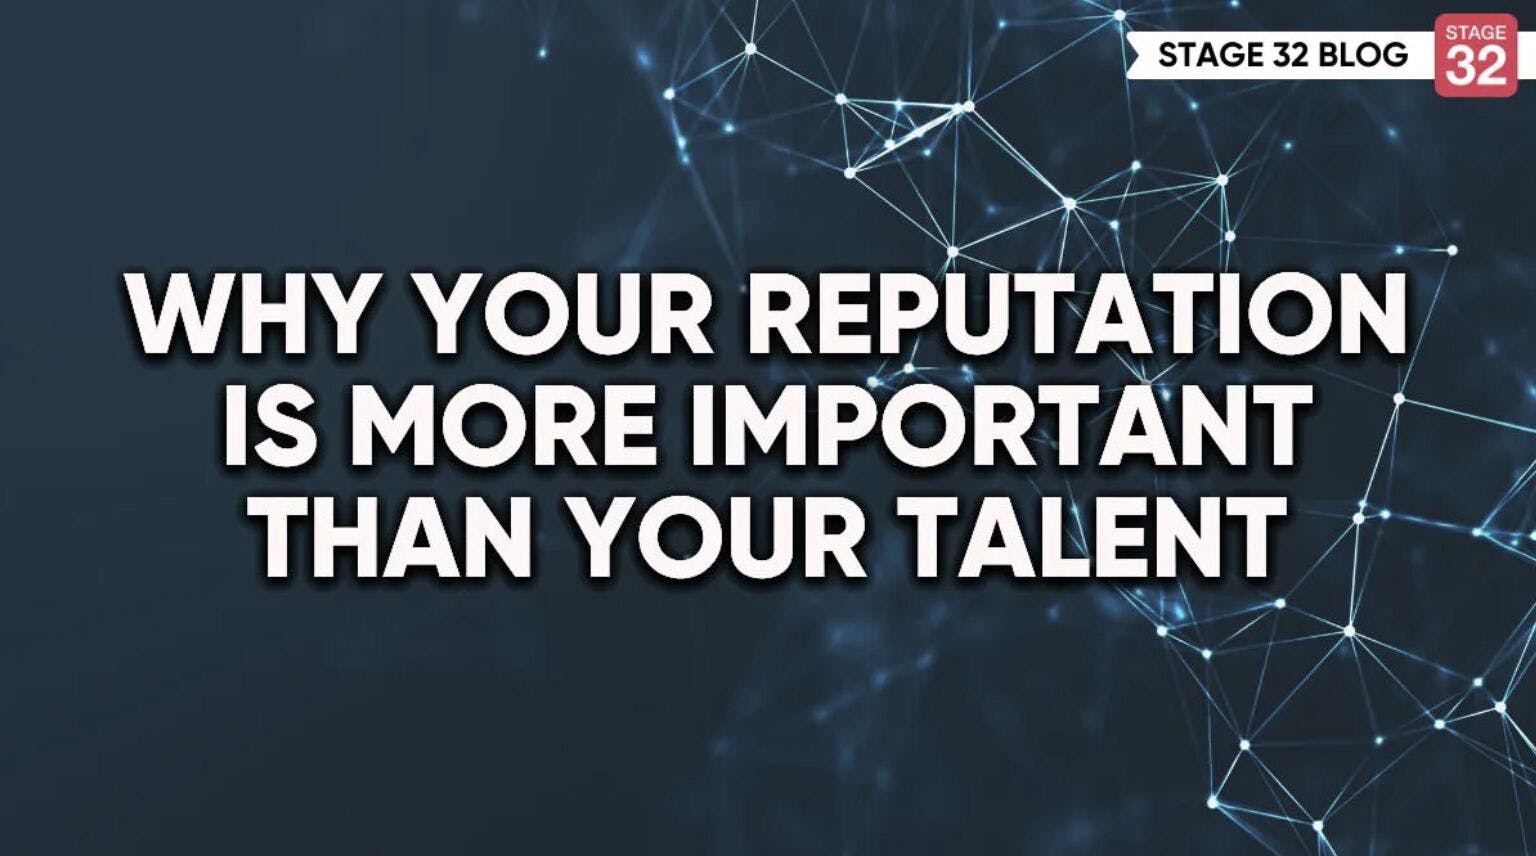 Why Your Reputation Is More Important Than Your Talent